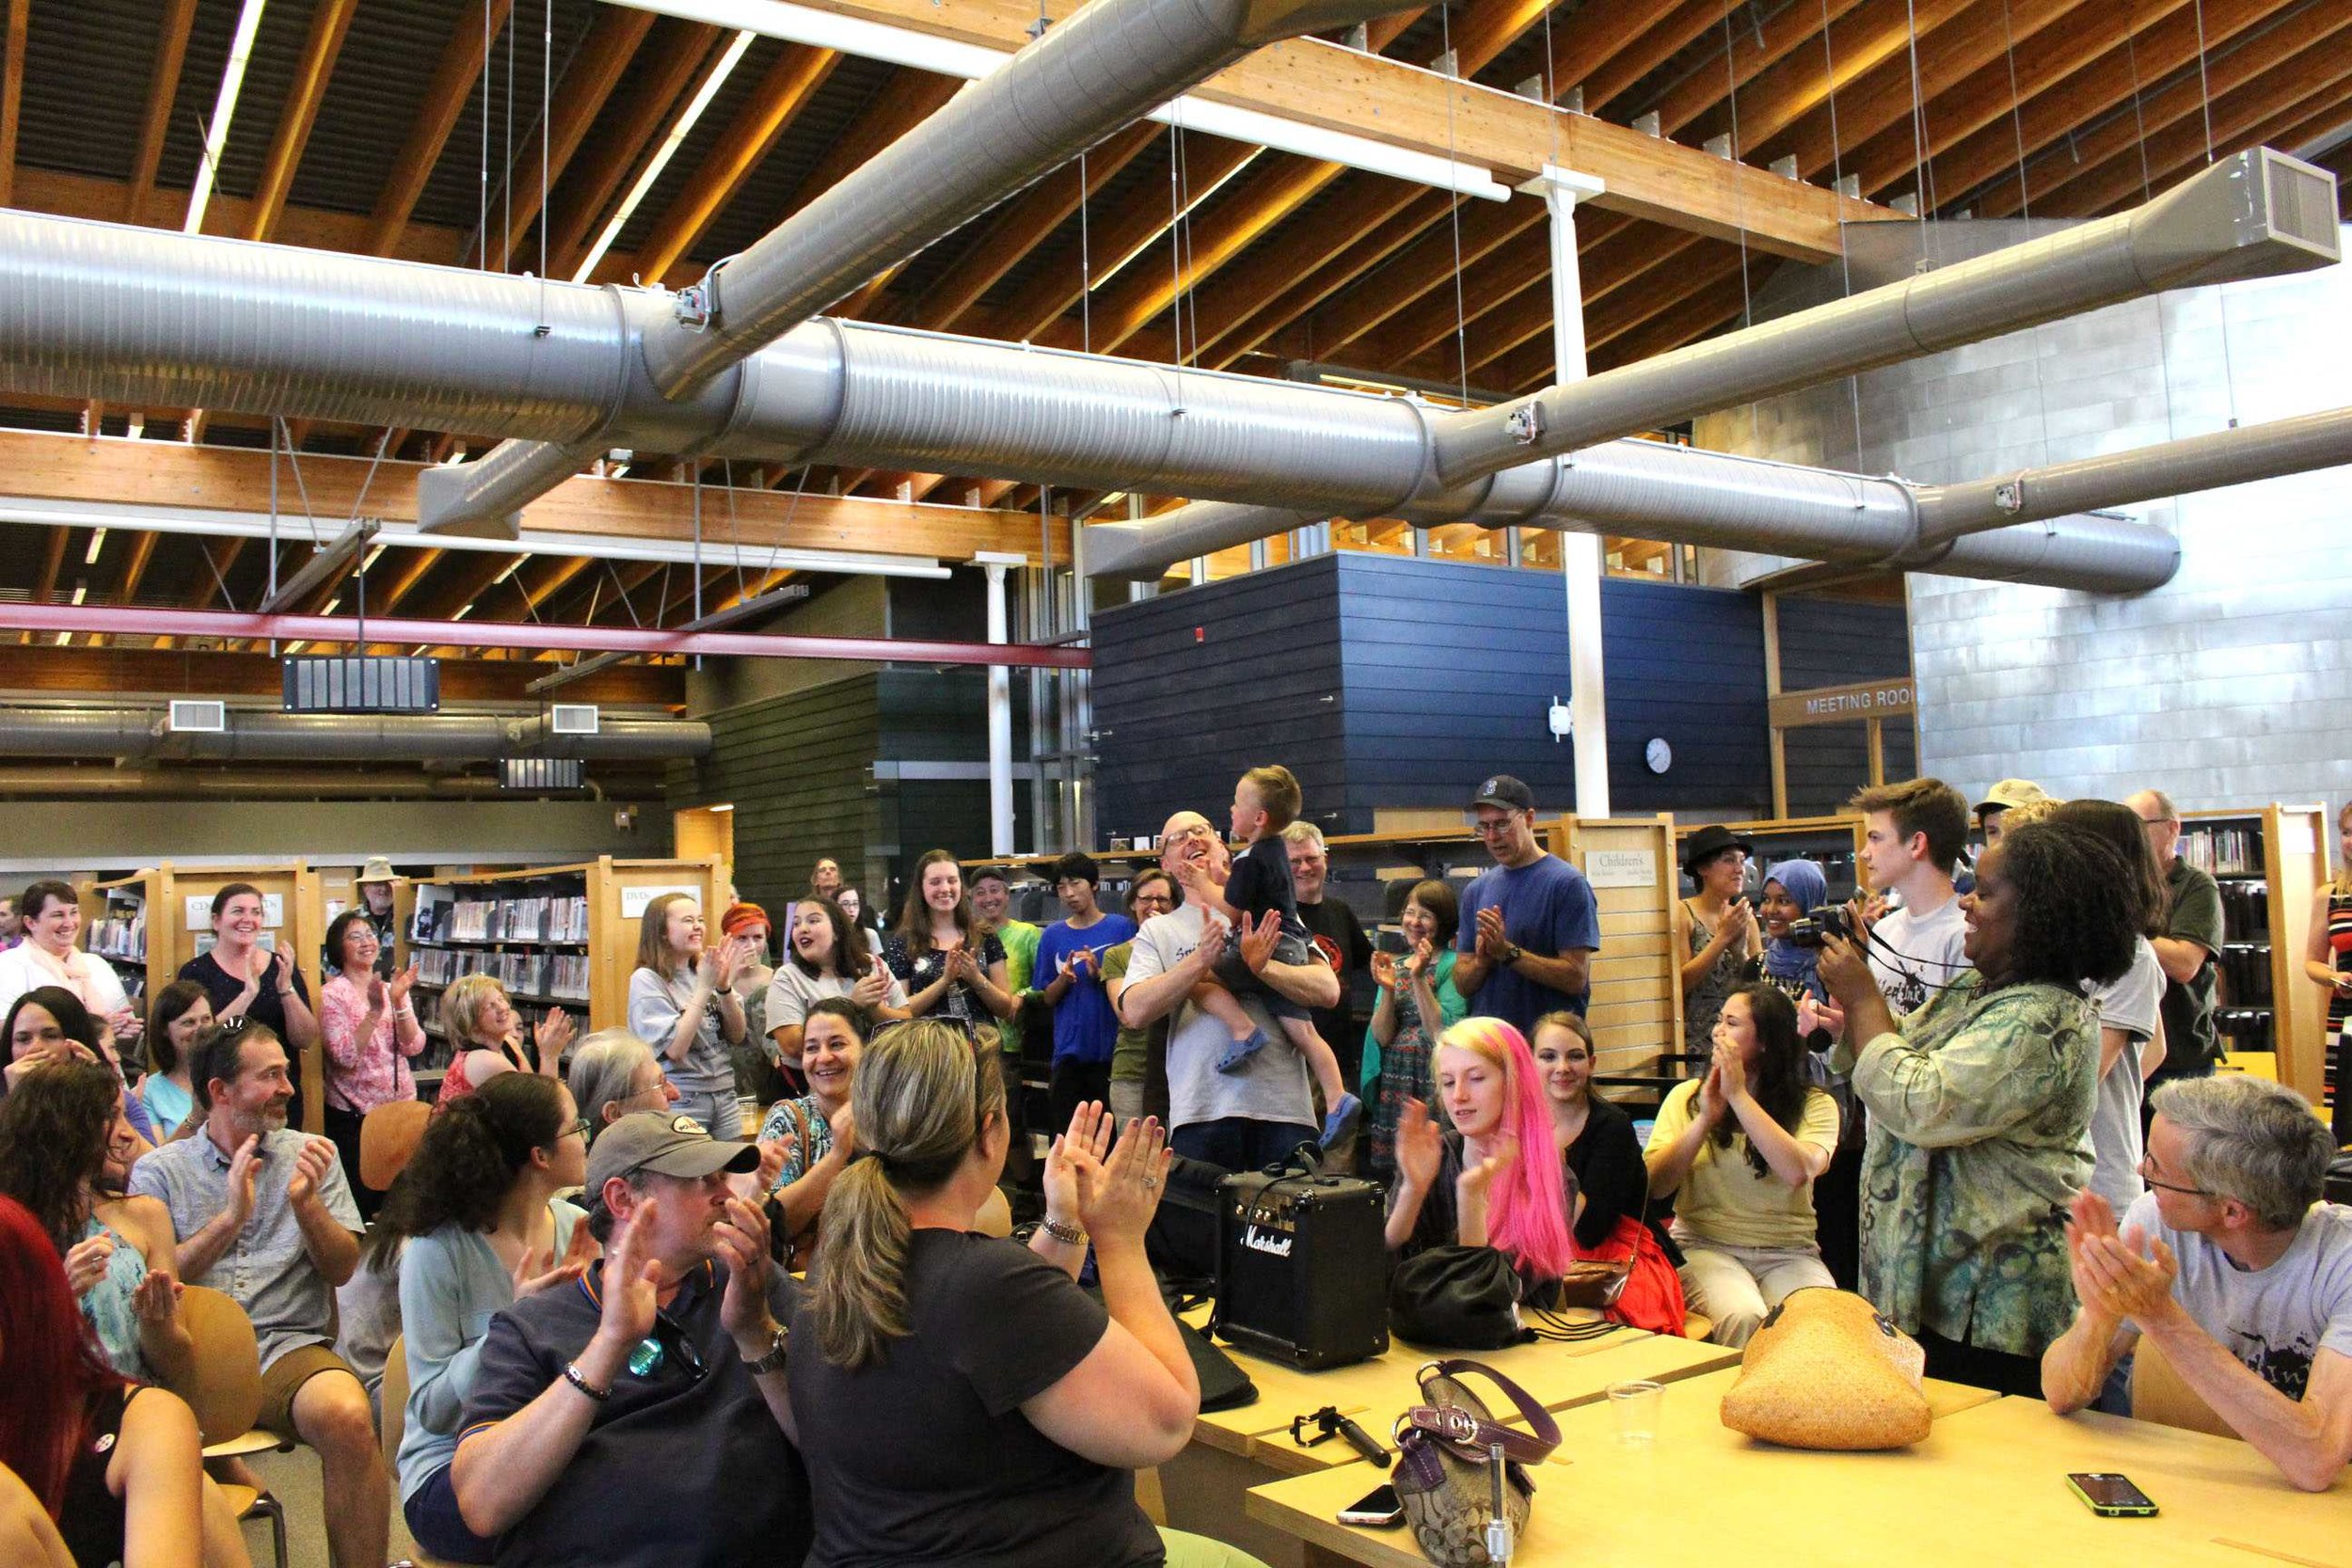 Even though it was his son’s birthday, art teacher Matt Harkleroad made it to Spilled Ink Art and Literature Night. Here, the crowd applauds after singing happy birthday to the newly three-year-old boy.